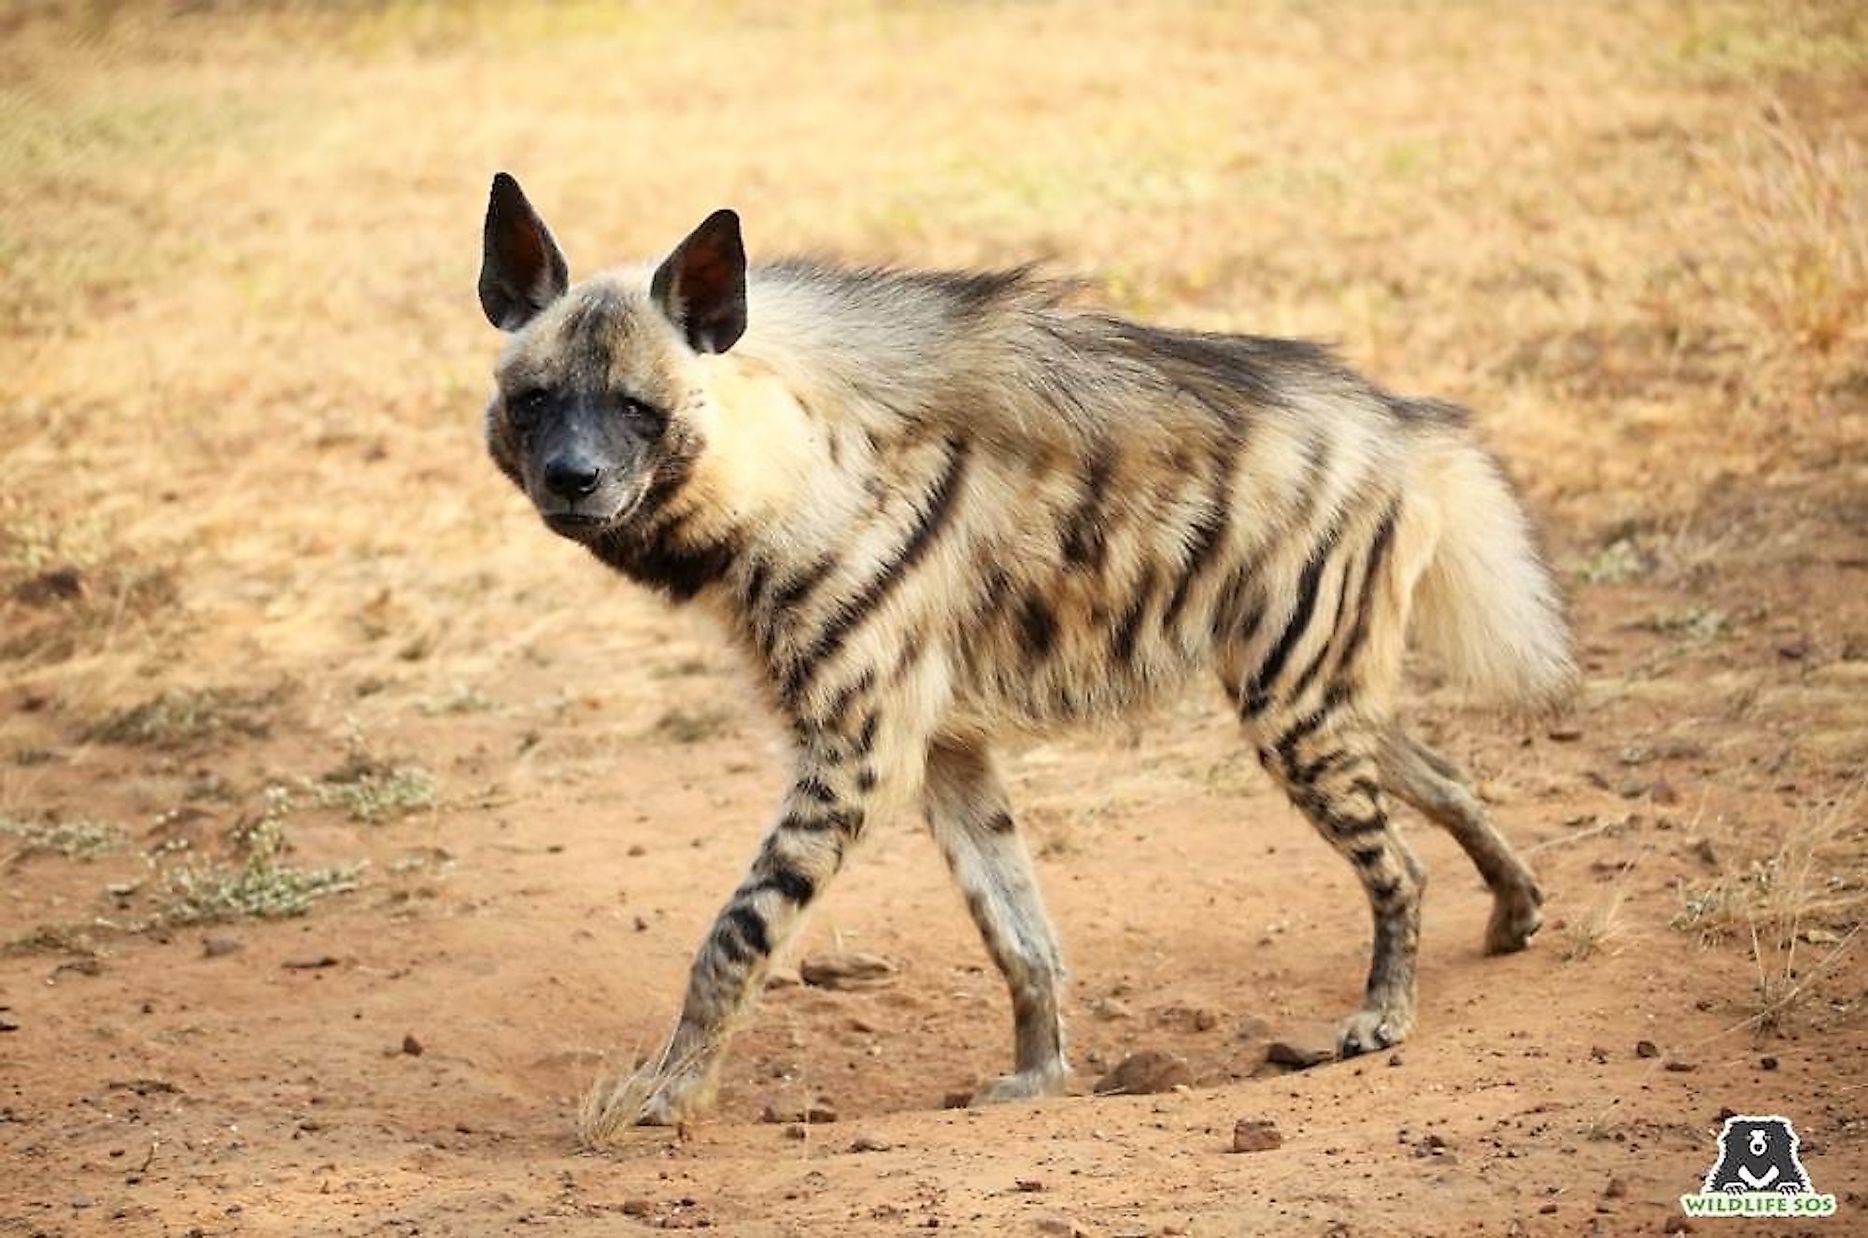 Time To Recognize That Hyenas Are Nice, Not Nasty - WorldAtlas